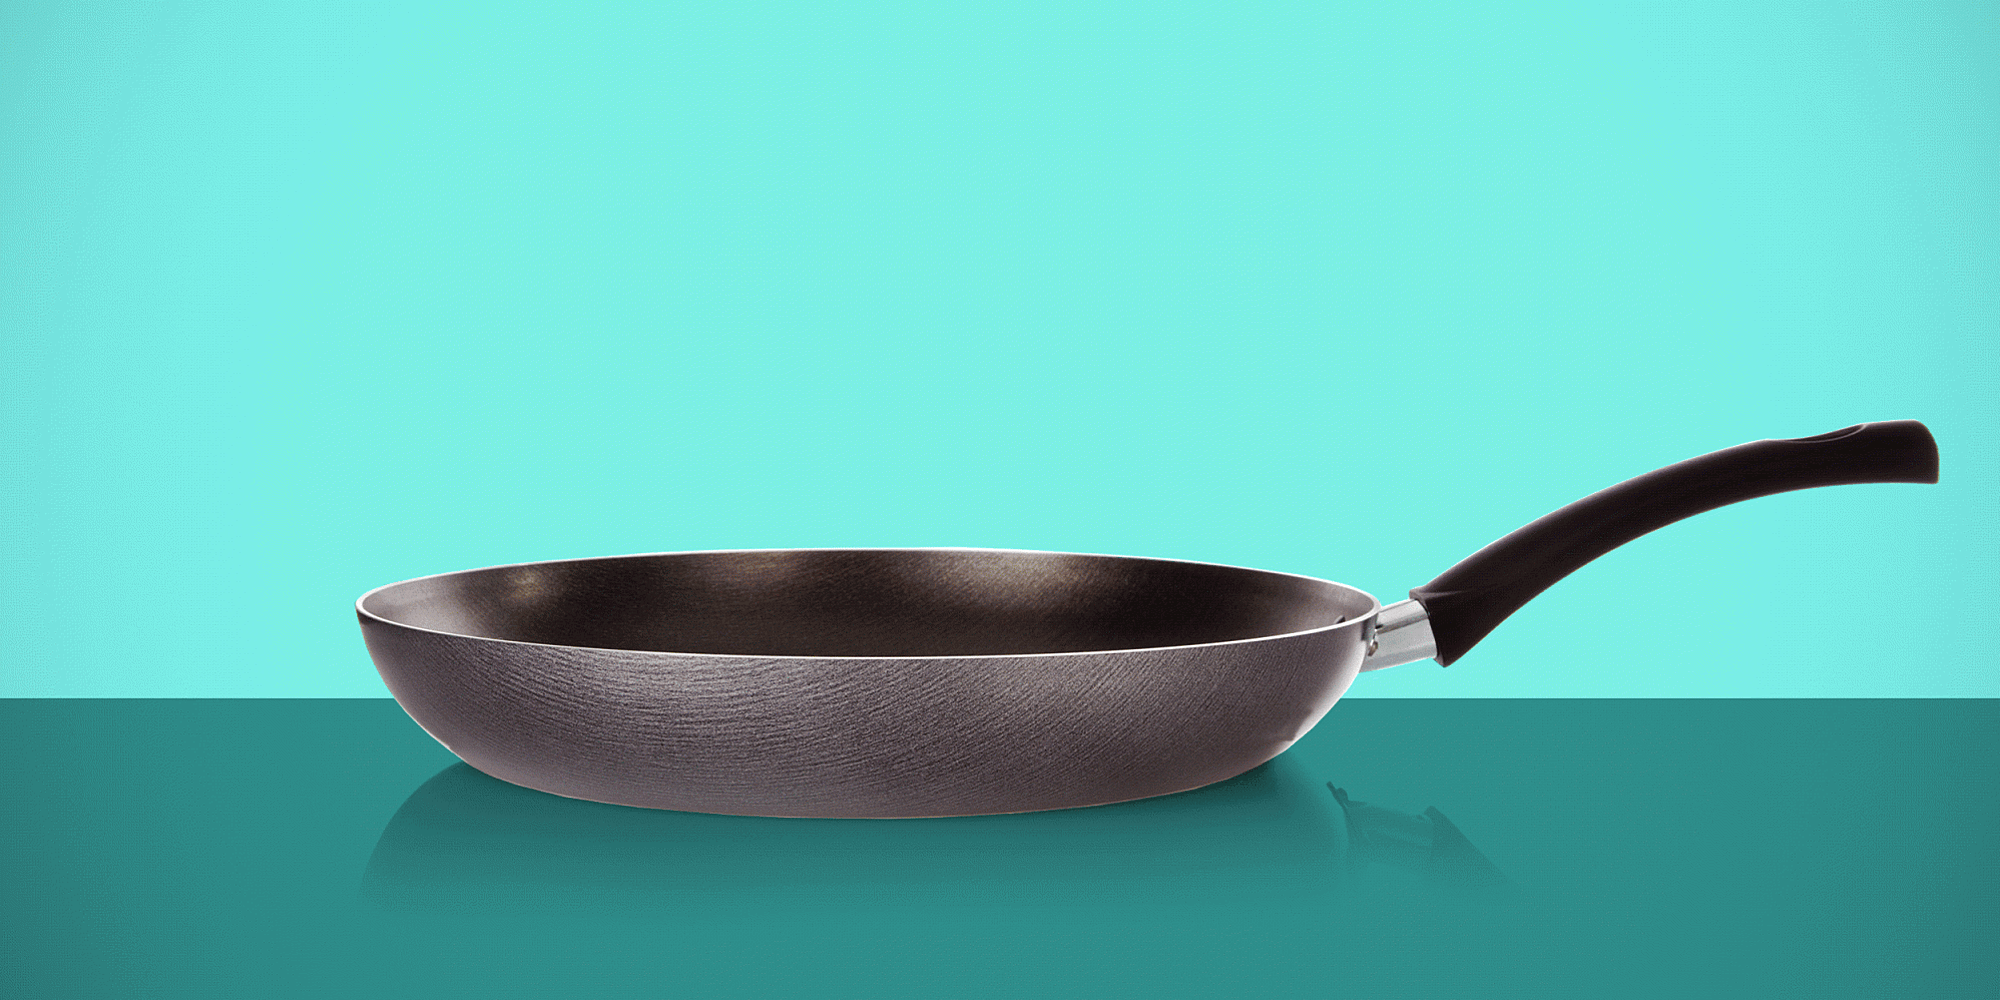 Non-stick is making you sick: the no-fuss guide to non-toxic